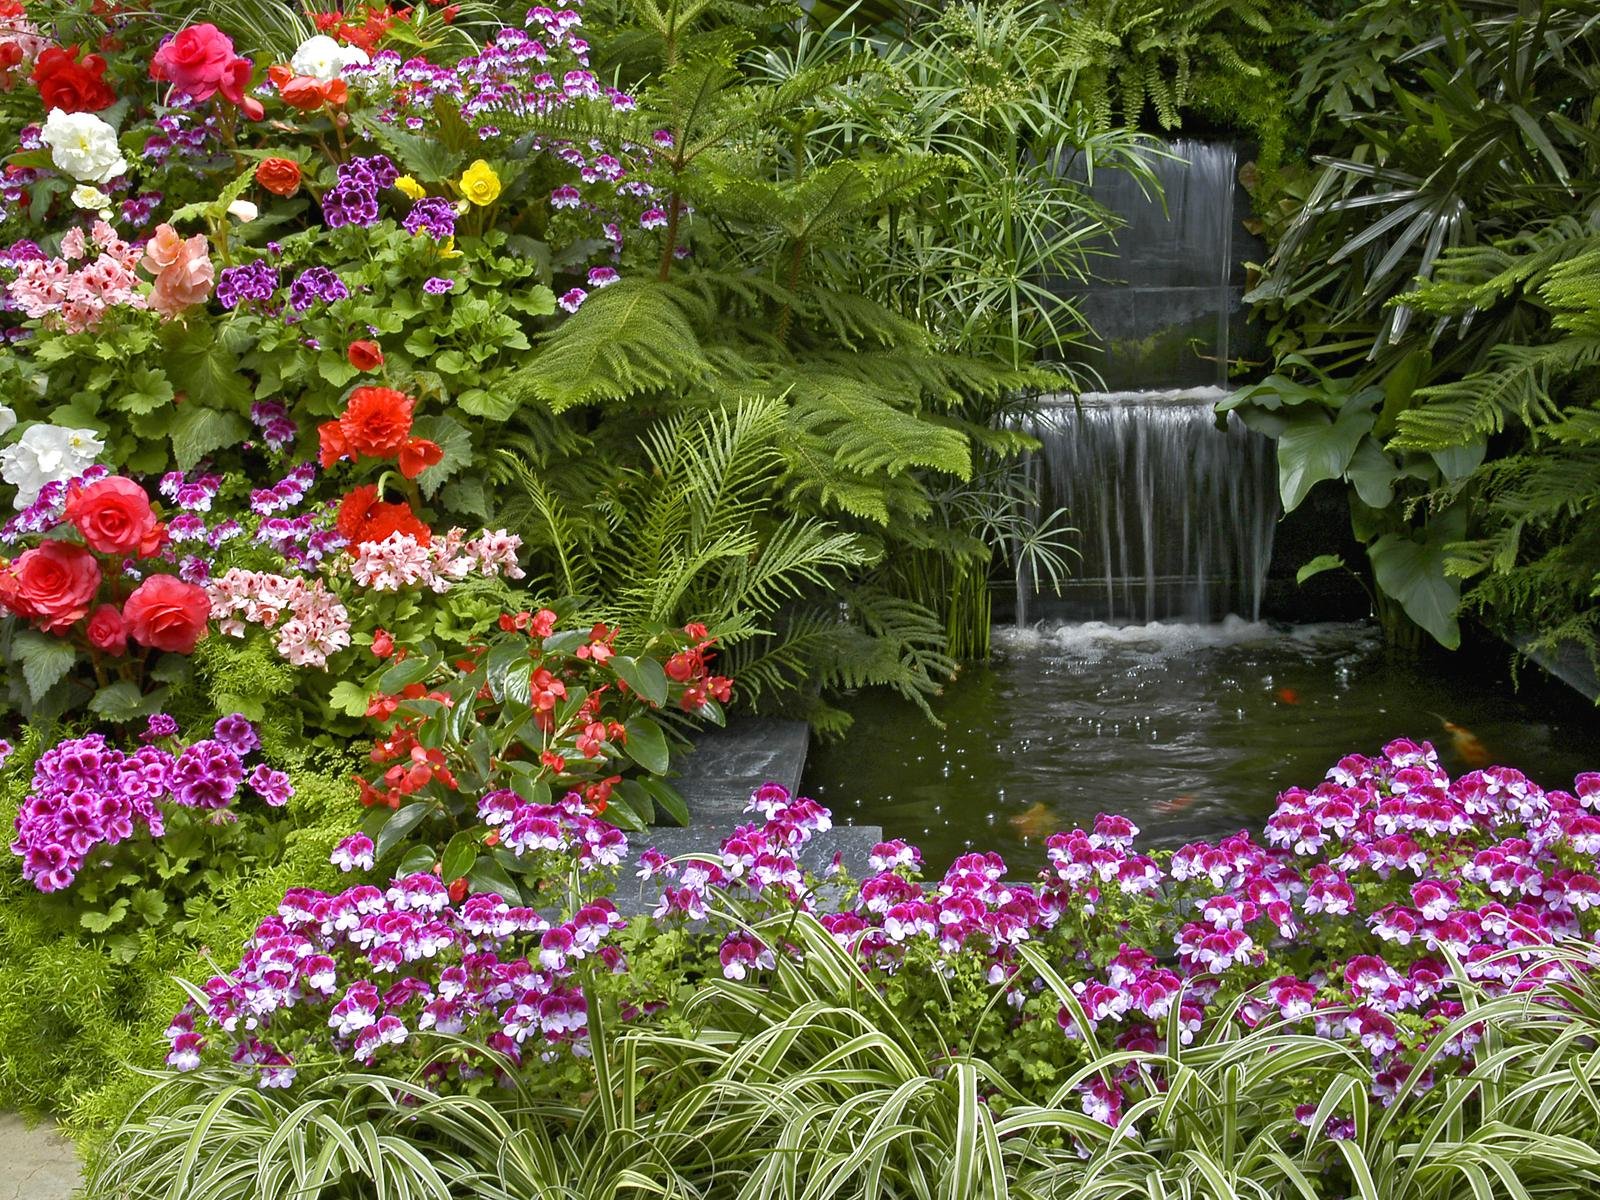 Colorful begonia, serene waterfall, vibrant geranium, and lush fern create a captivating desktop wallpaper by C.Knight.